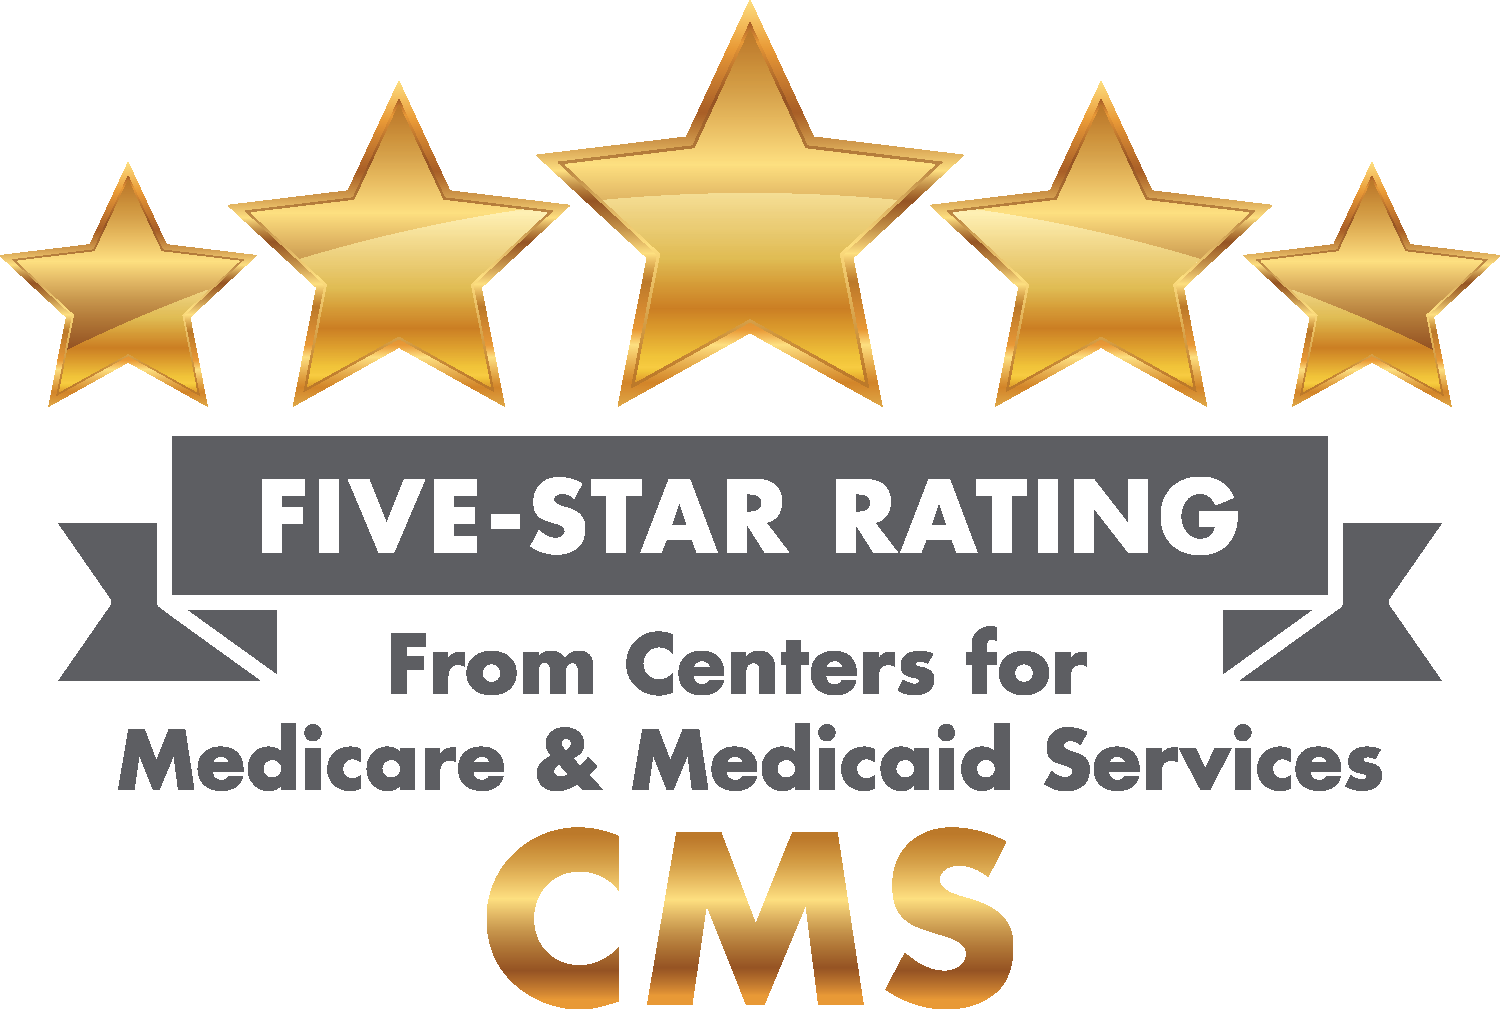 Five-star rating from Centers for Medicare & Medicaid Services